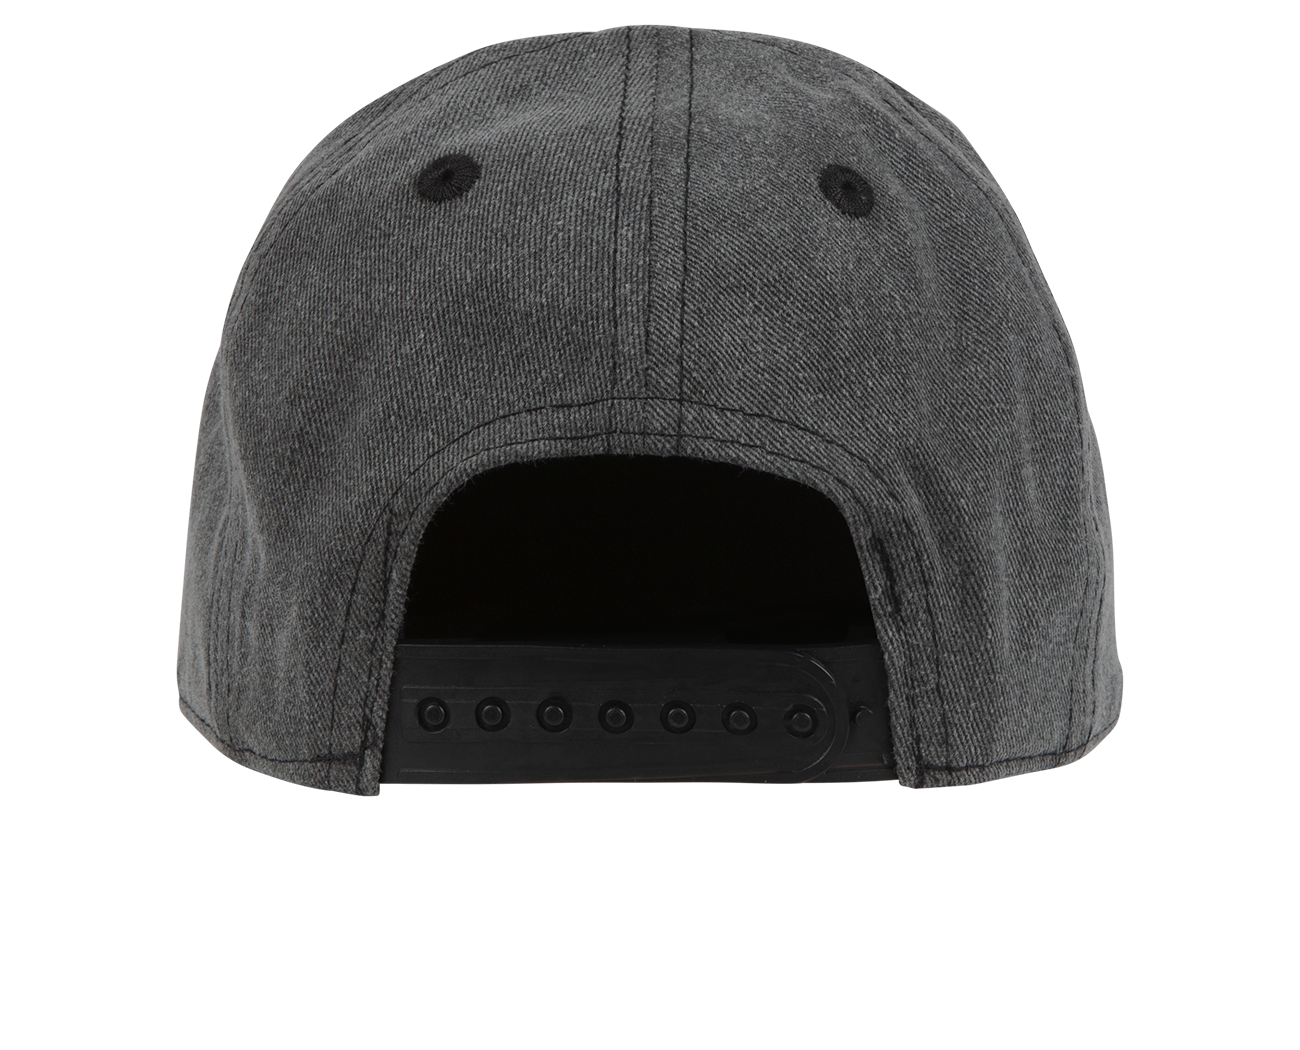 Torrey Pines Hat: Toddler (12 months - 3 years) / charcoal / Standard Fit